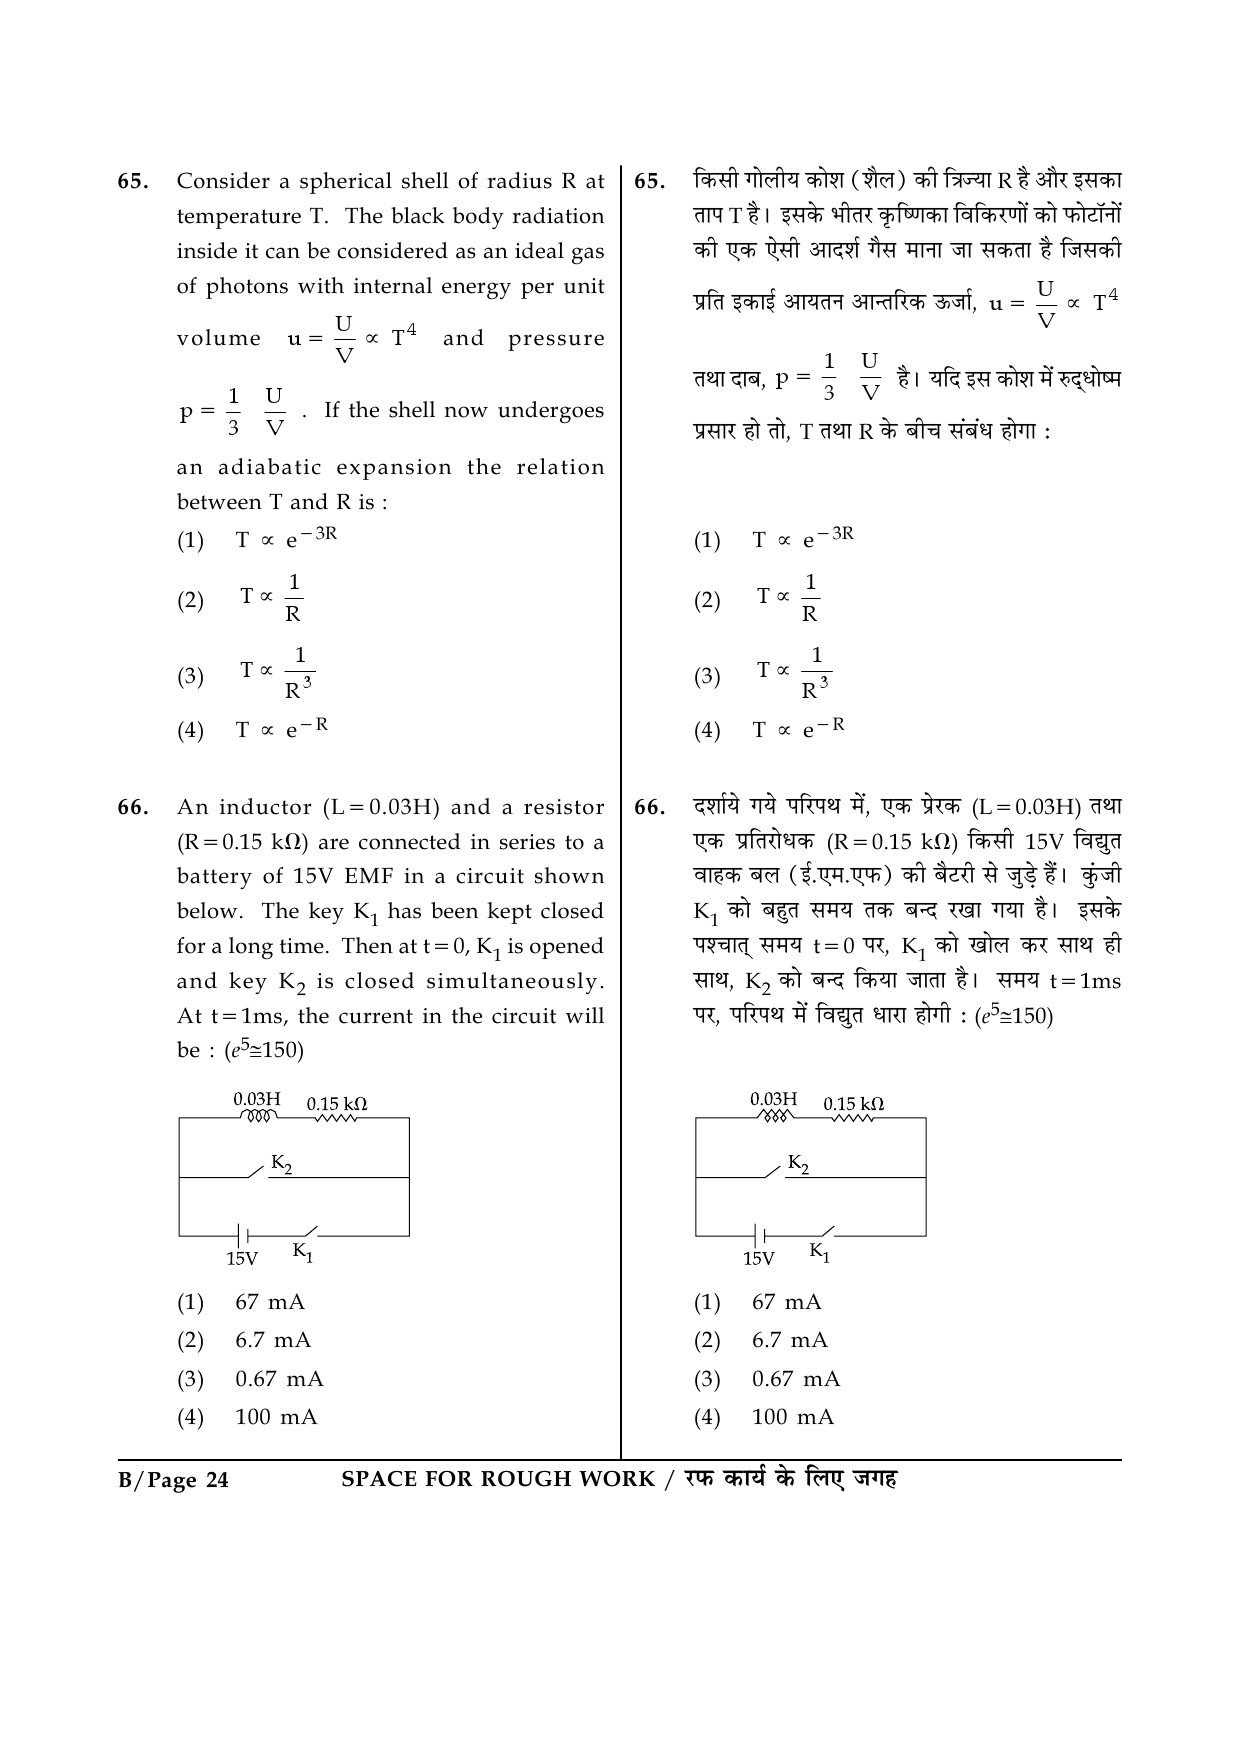 JEE Main Exam Question Paper 2015 Booklet B 24